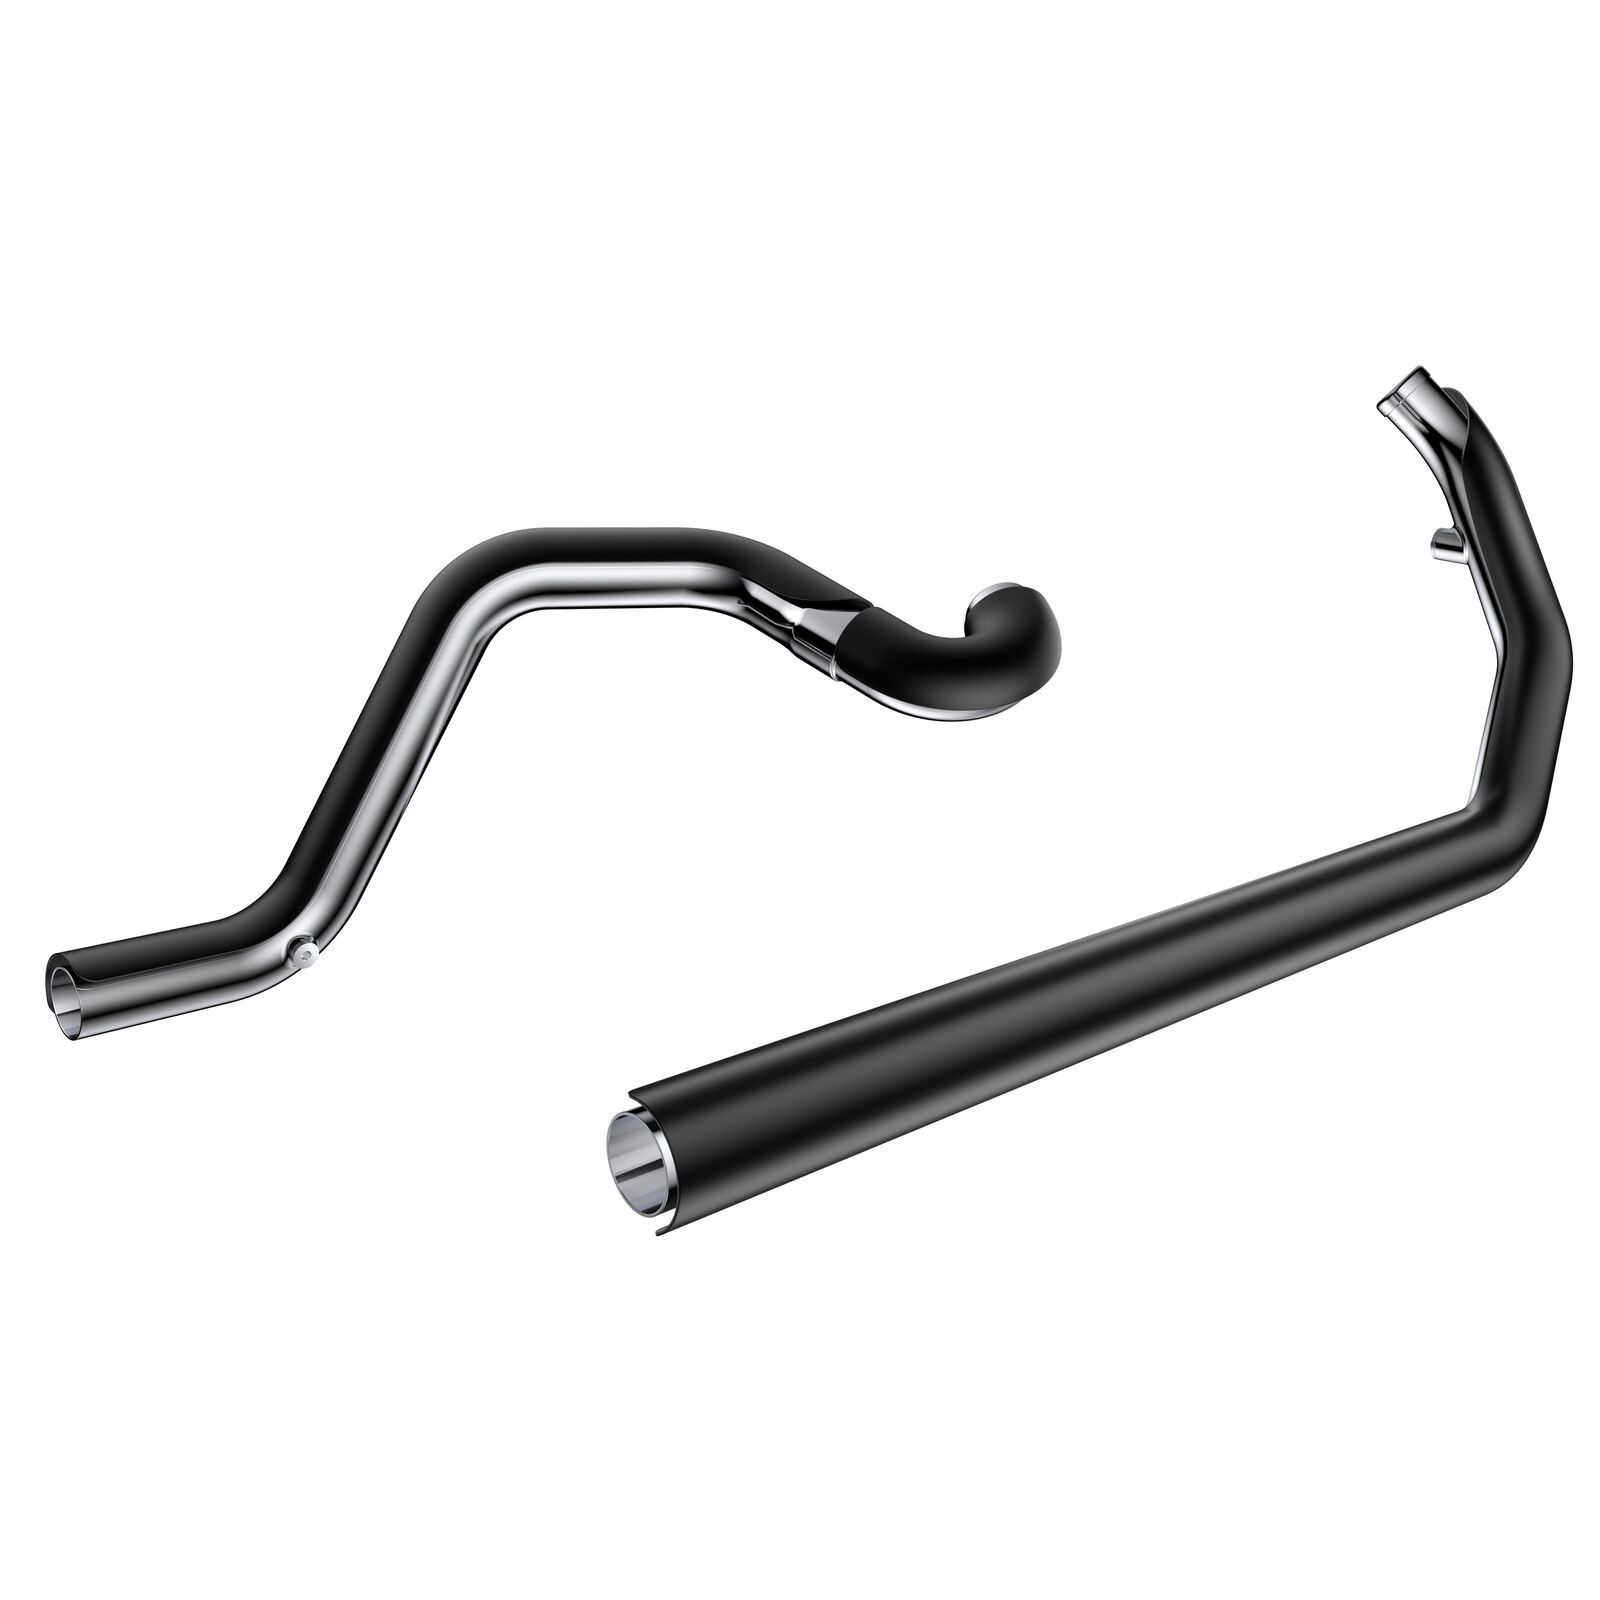 SHARKROAD Headers for True Dual Exhaust for Harley 95-16 Touring Black